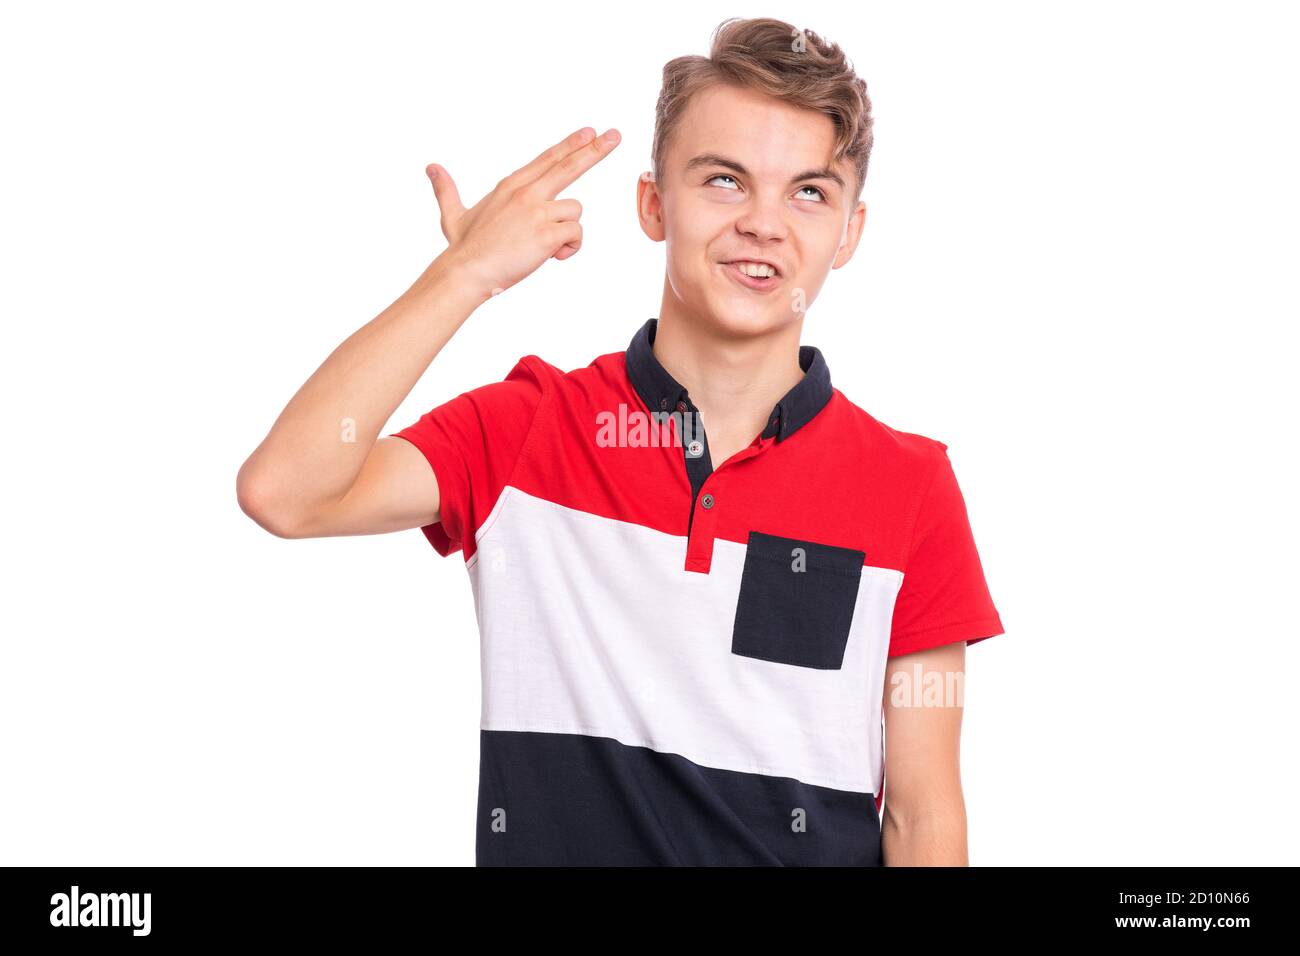 Boy emotions and signs Stock Photo